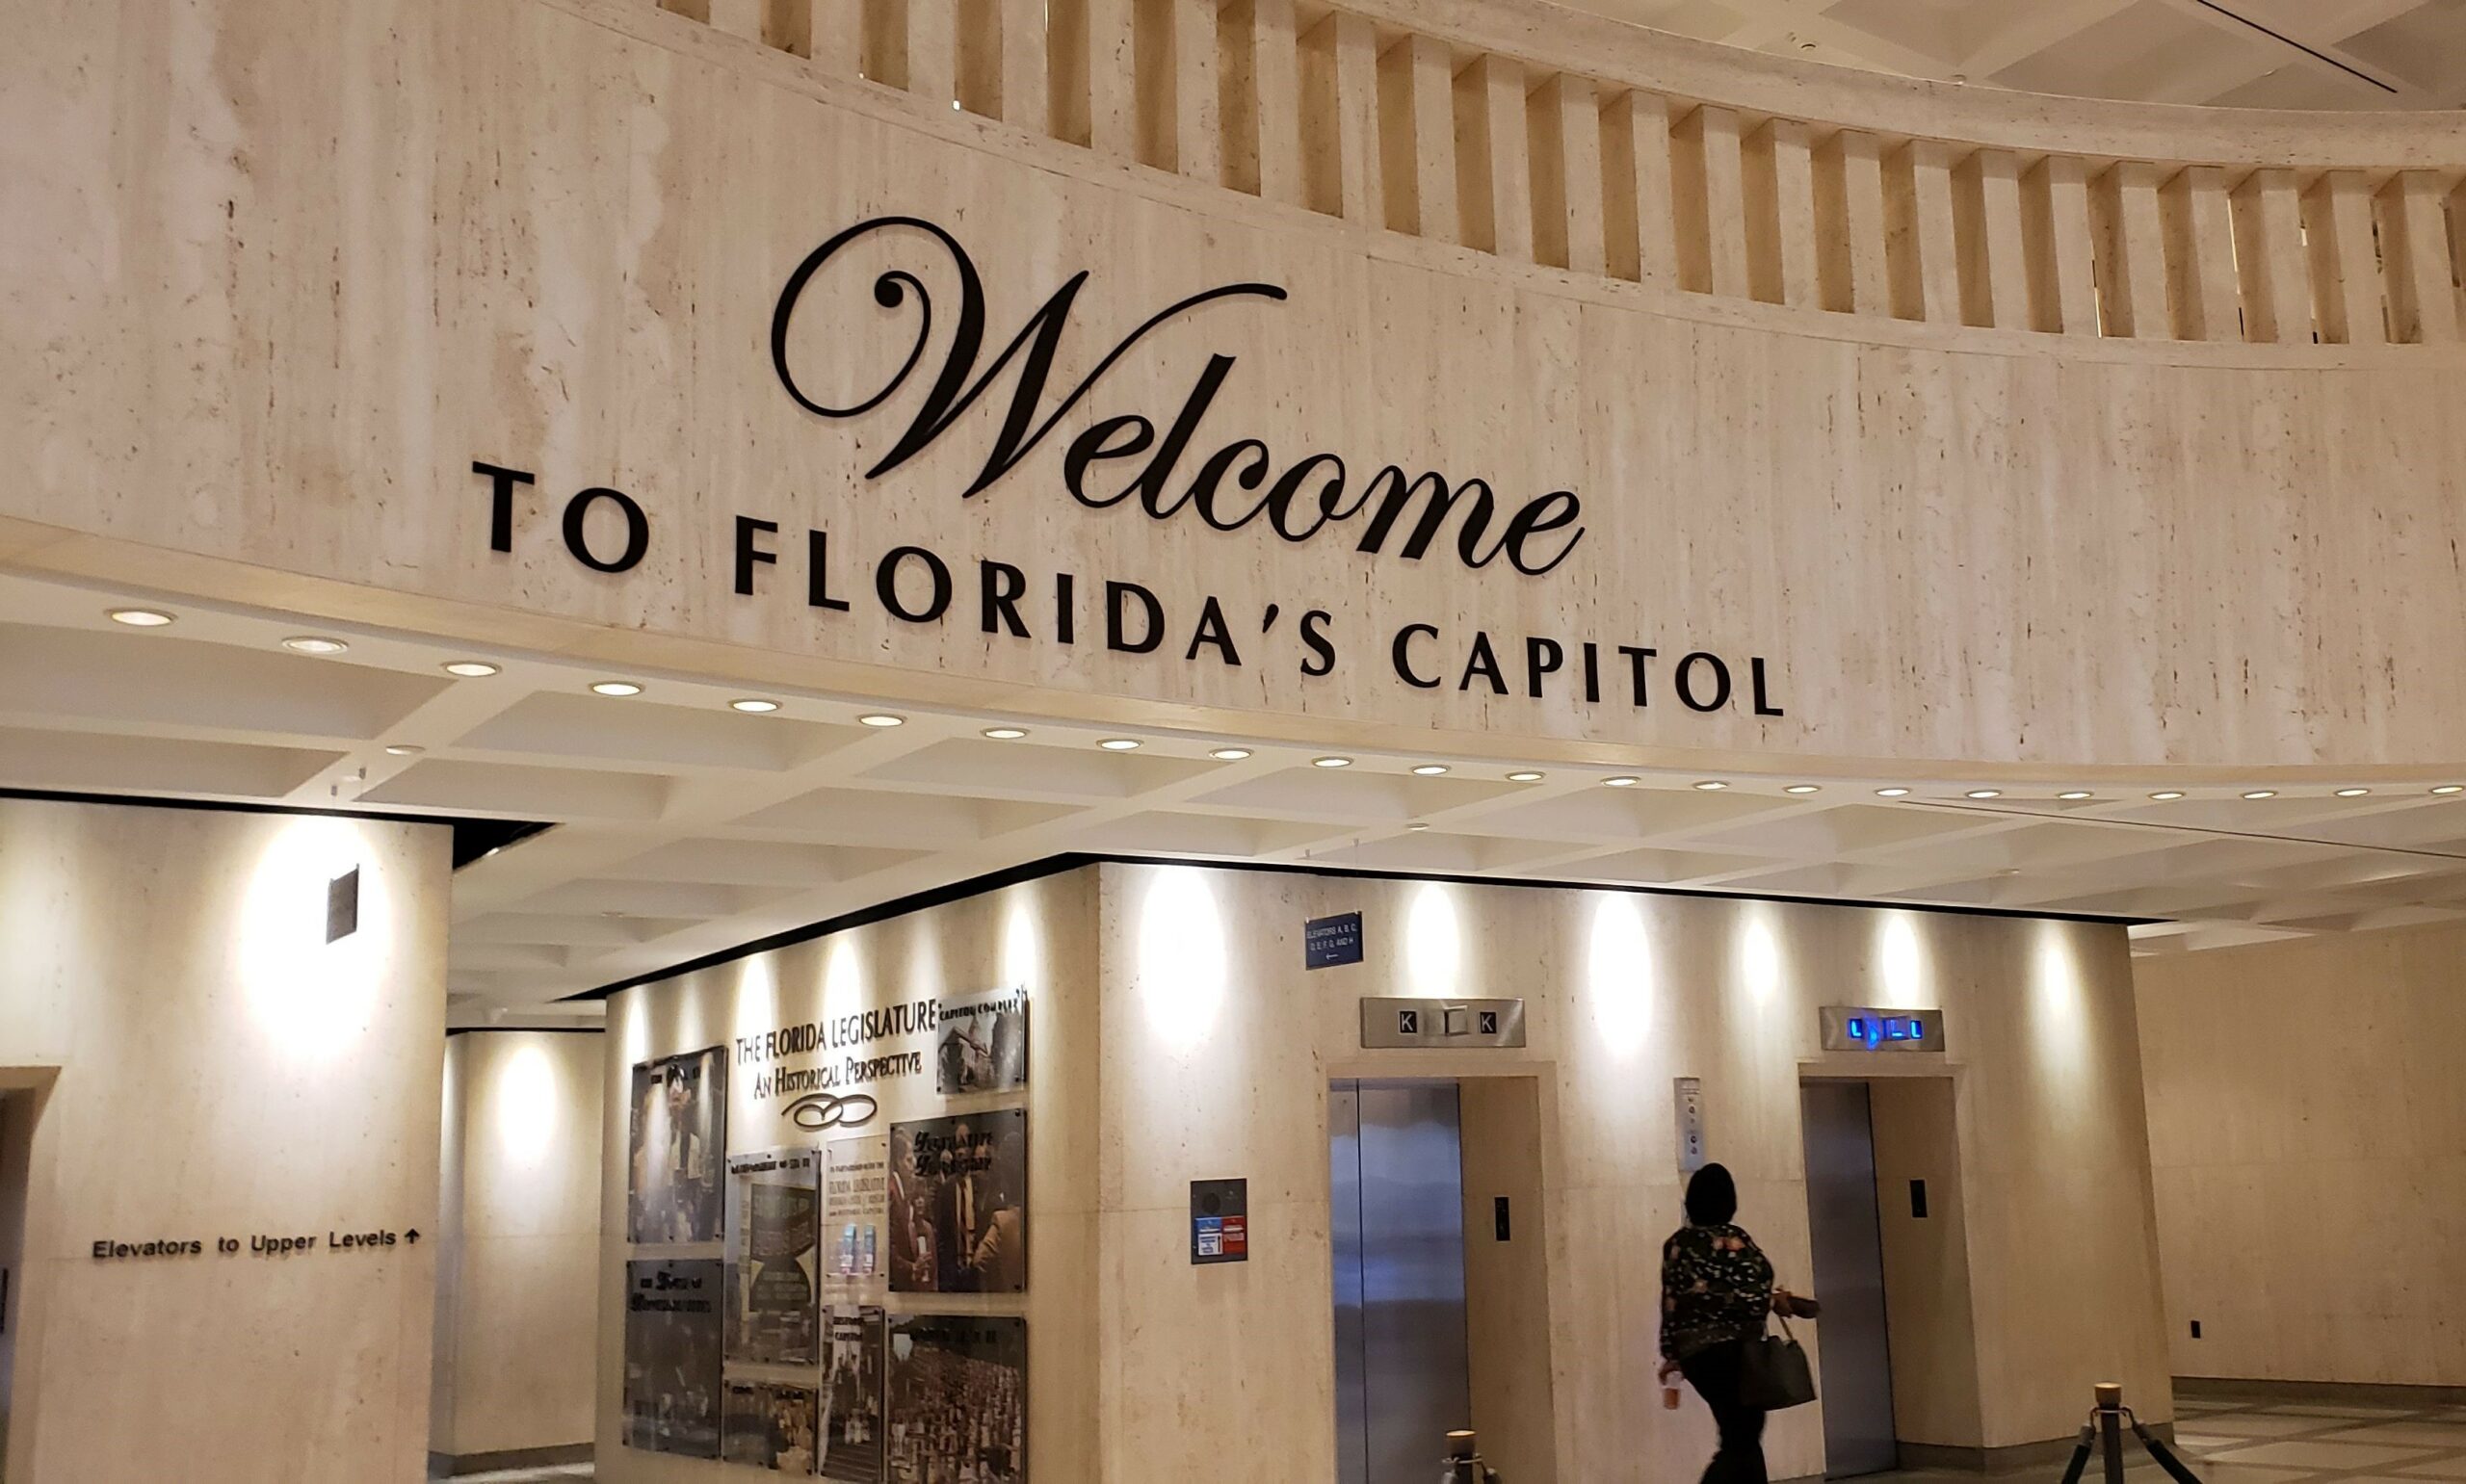 Photo shows inside of Capitol rotunda and the words Welcome to Florida's Capitol